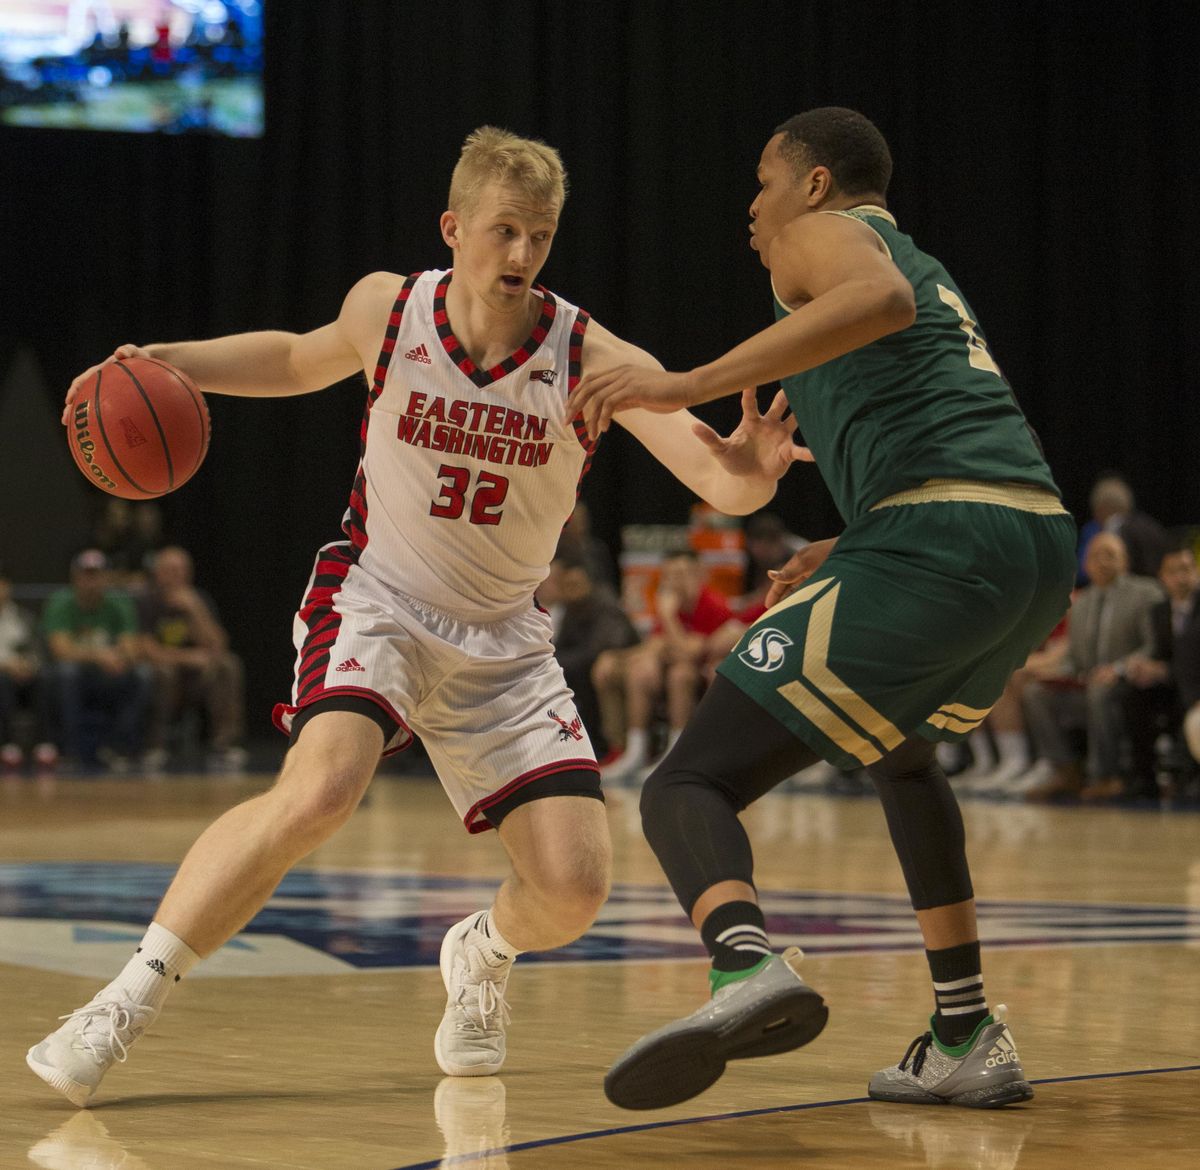 Eastern Washington Eagles shoots over Sacramento State Hornets in a Big Sky Tournament game held at the Reno Events Center on Thursday, March 9, 2017 in Reno, Nevada. (Tom R. Smedes / Special to The Spokesman-Review)